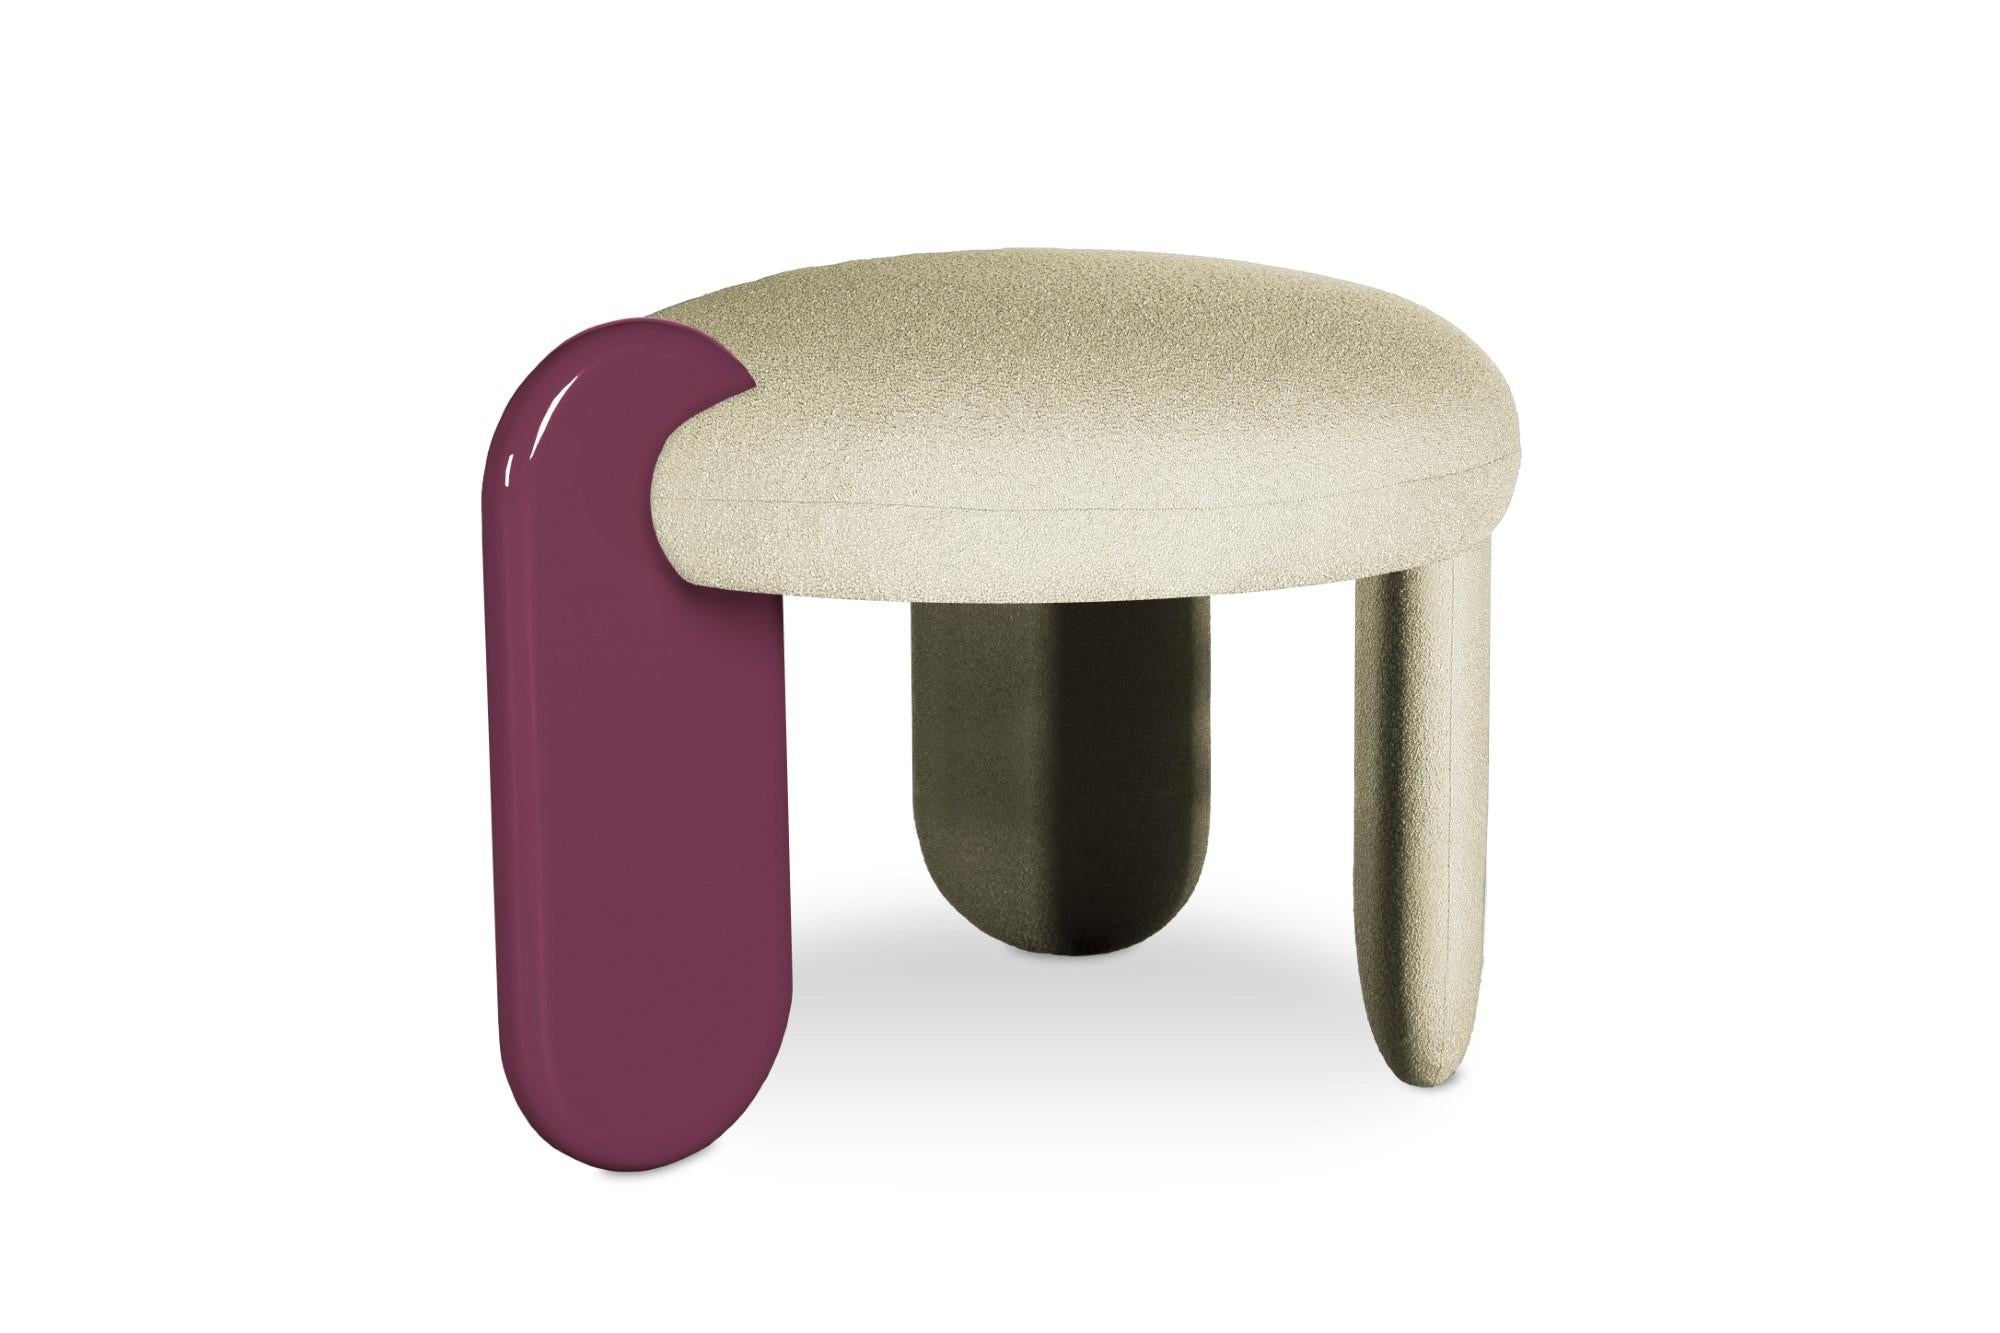 Glazy stool by Royal Stranger
Dimensions: W 68.5 x D 50 x D 60 cm.
Materials: Solid wood frame, foam, upholstery. 
Also available in other leg colors, Royal Stranger’s fabrics and in COM.

Step into a world of eye candy furniture with glazy